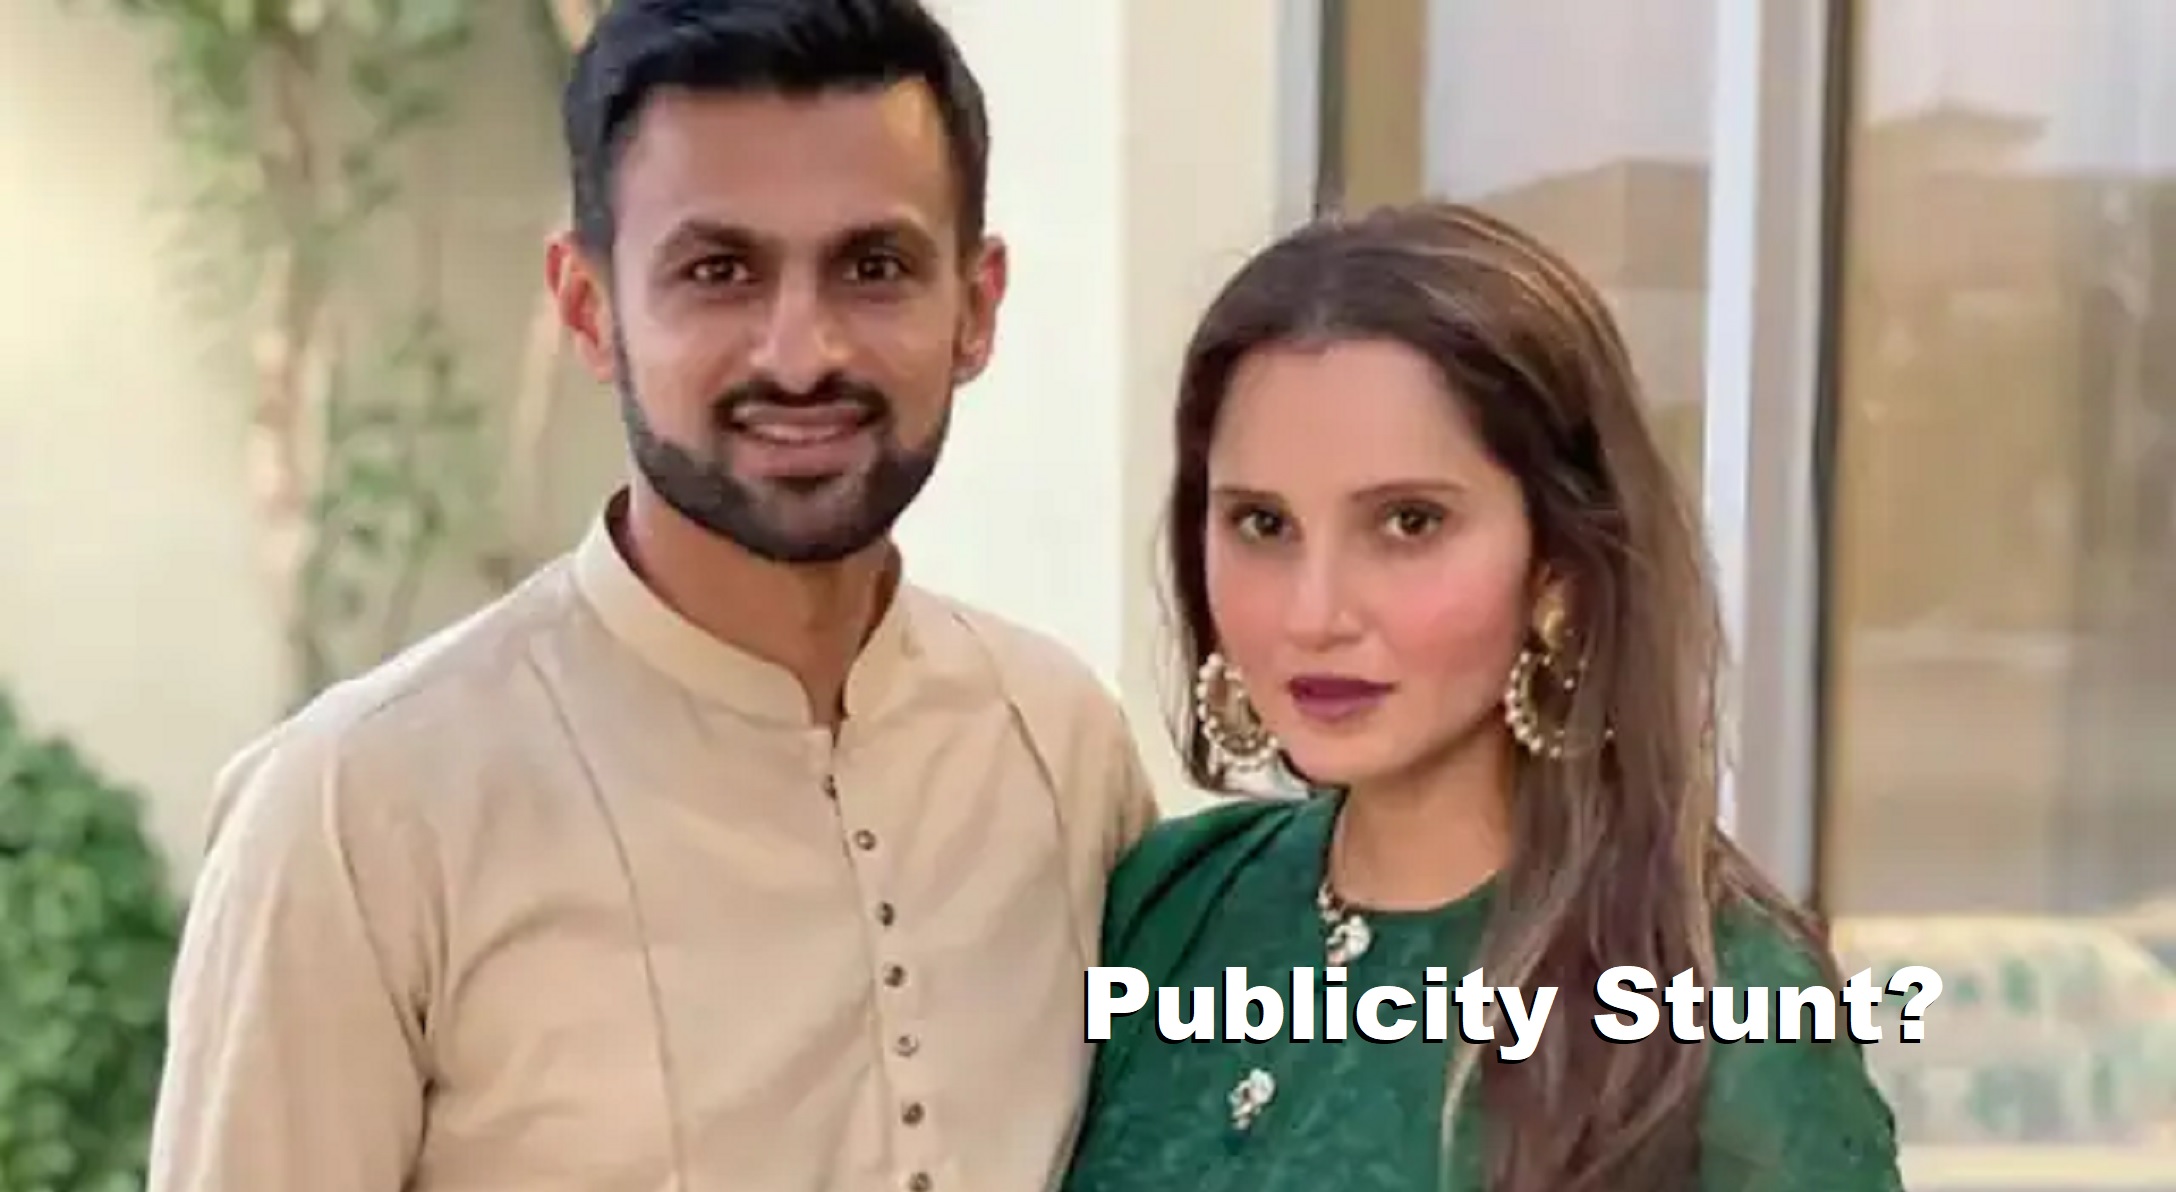 After divorce rumours, Sania Mirza and Shoaib Malik unite for a reality show for an OTT platform